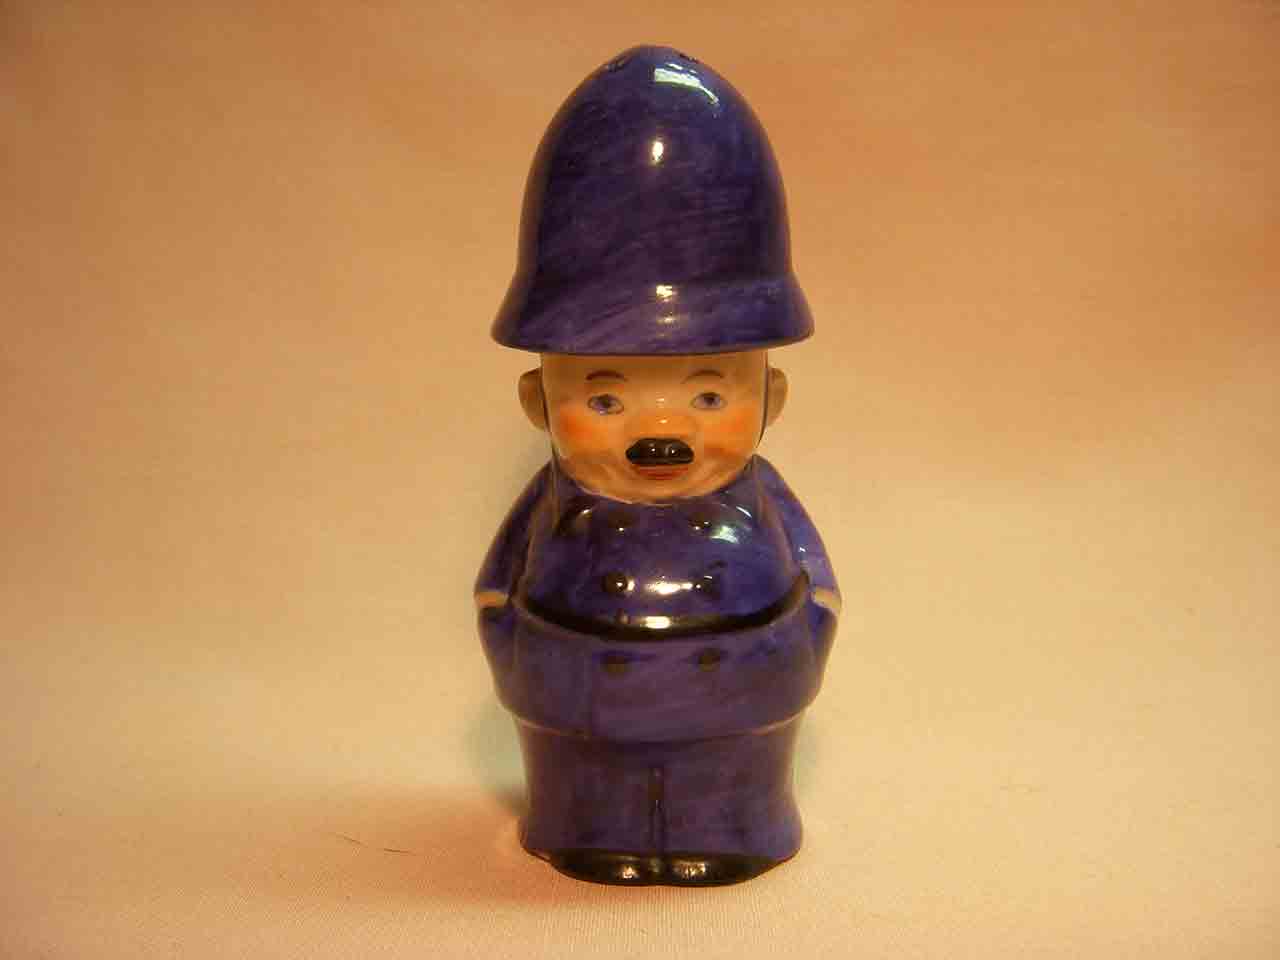 Police / cop Germany salt and pepper shaker